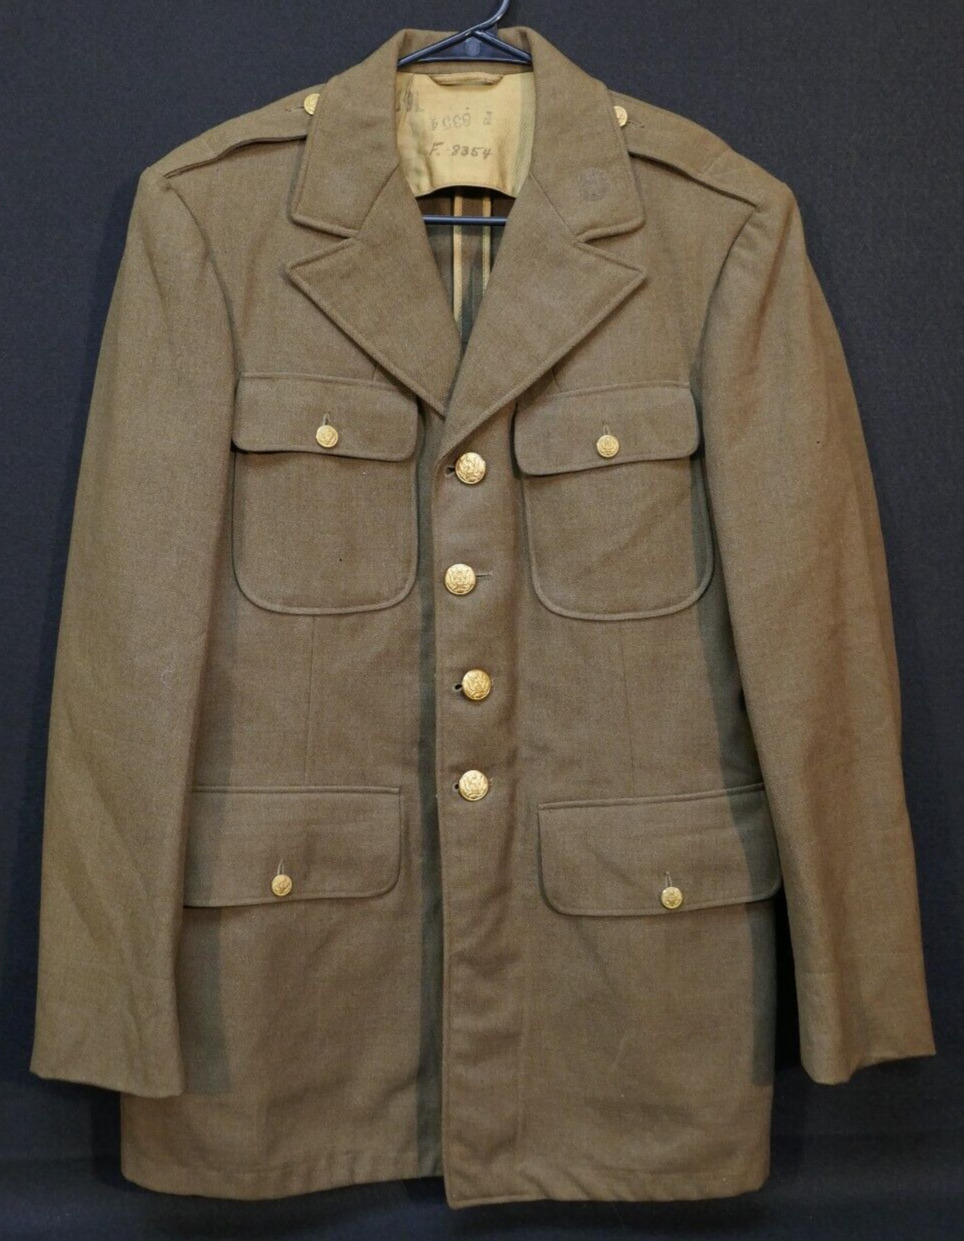 WW2 US Army M1942 Enlisted Wool Service Uniform Coat 39L 1942 Dated Class A Type